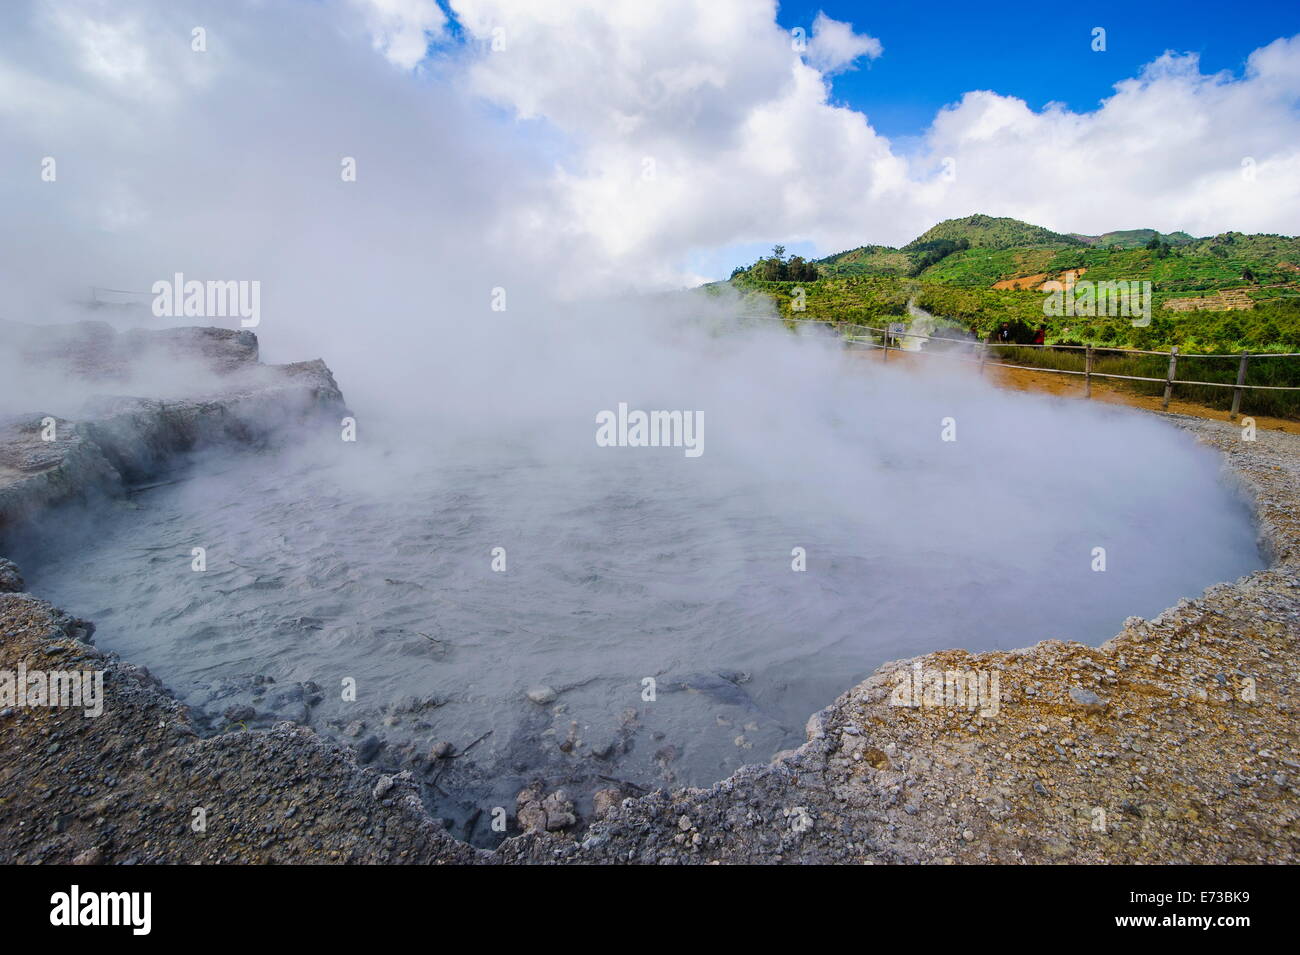 Smoking Sikidang Crater, Dieng Plateau, Java, Indonesia, Southeast Asia, Asia Stock Photo